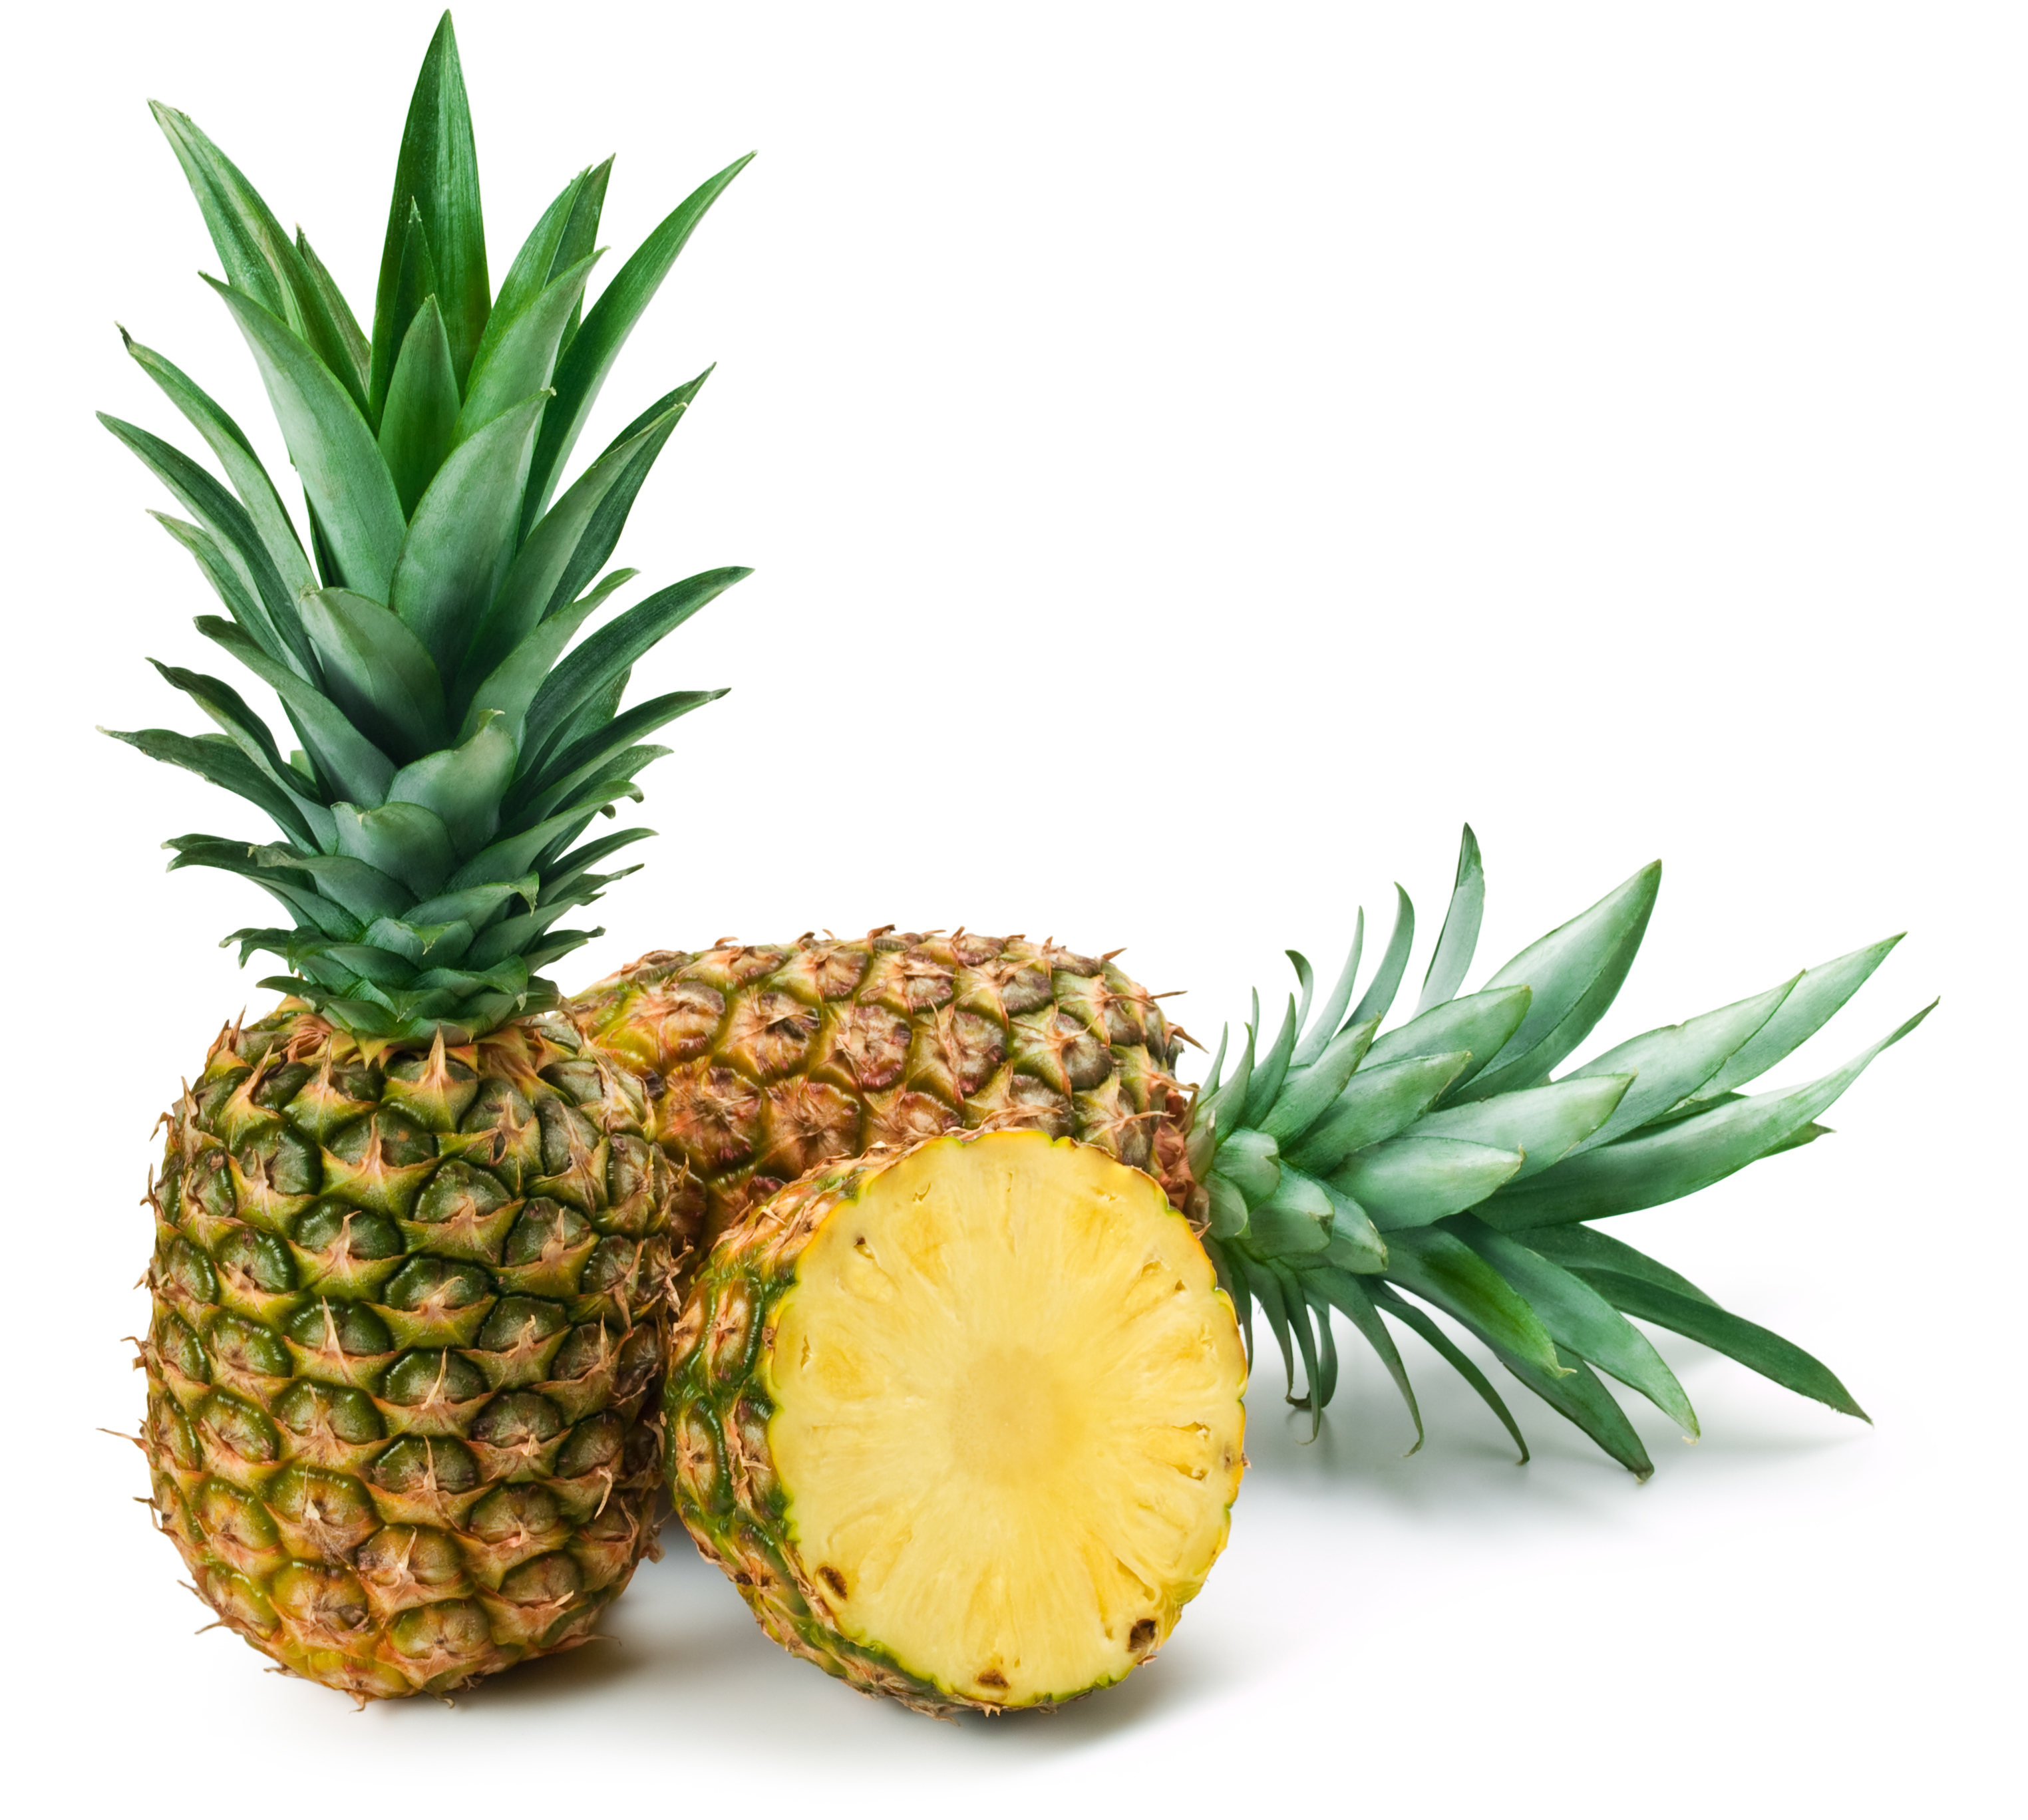 pineapple benefits for periods